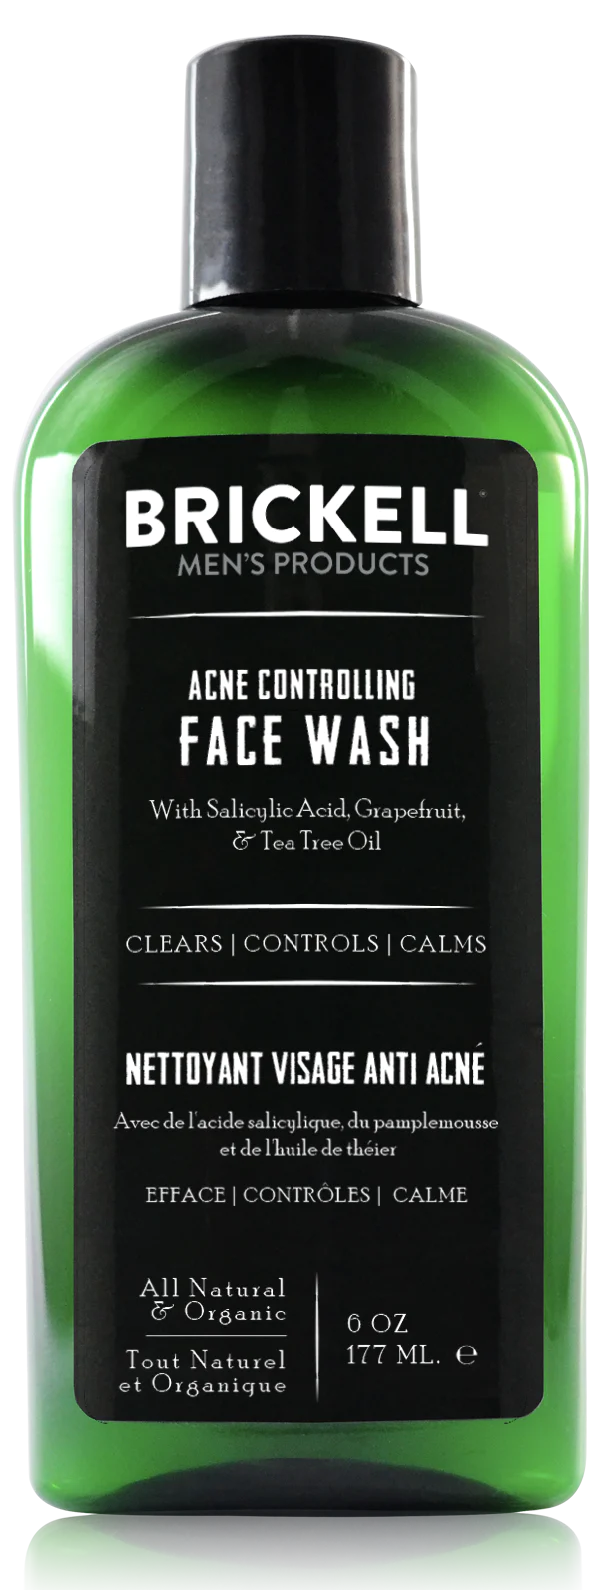 ACNE CONTROLLING CLEANSER